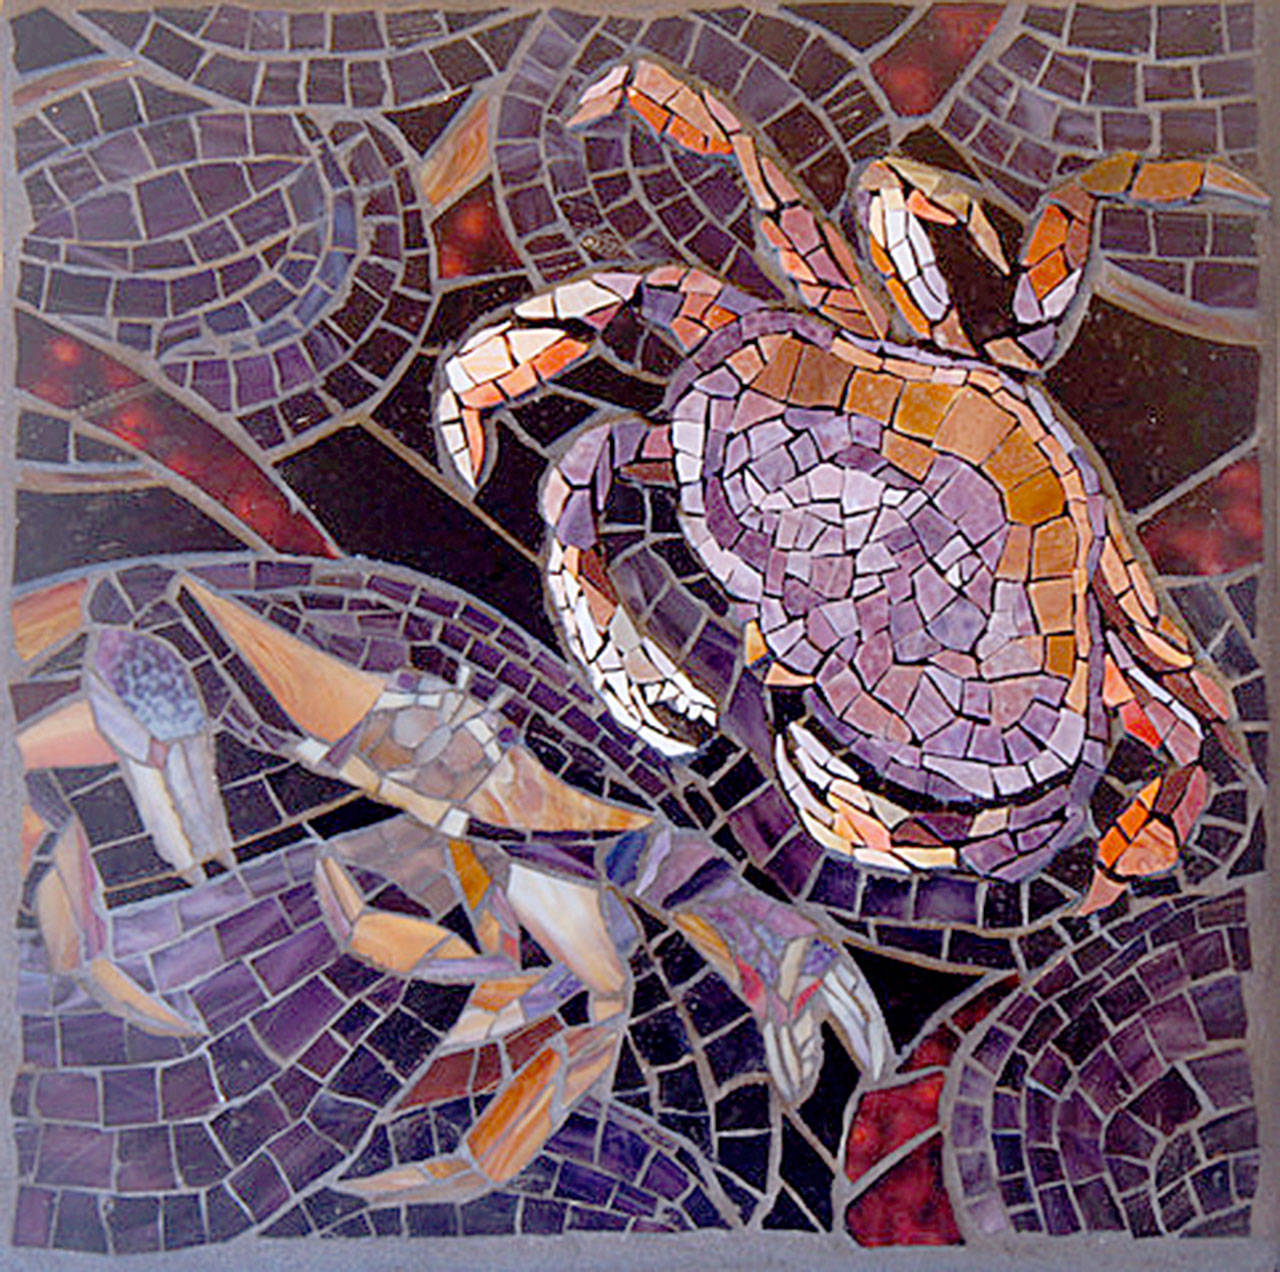 “Limit” by Joanne Daschel is among the mosaics that will be shown at Northwind Arts Center.